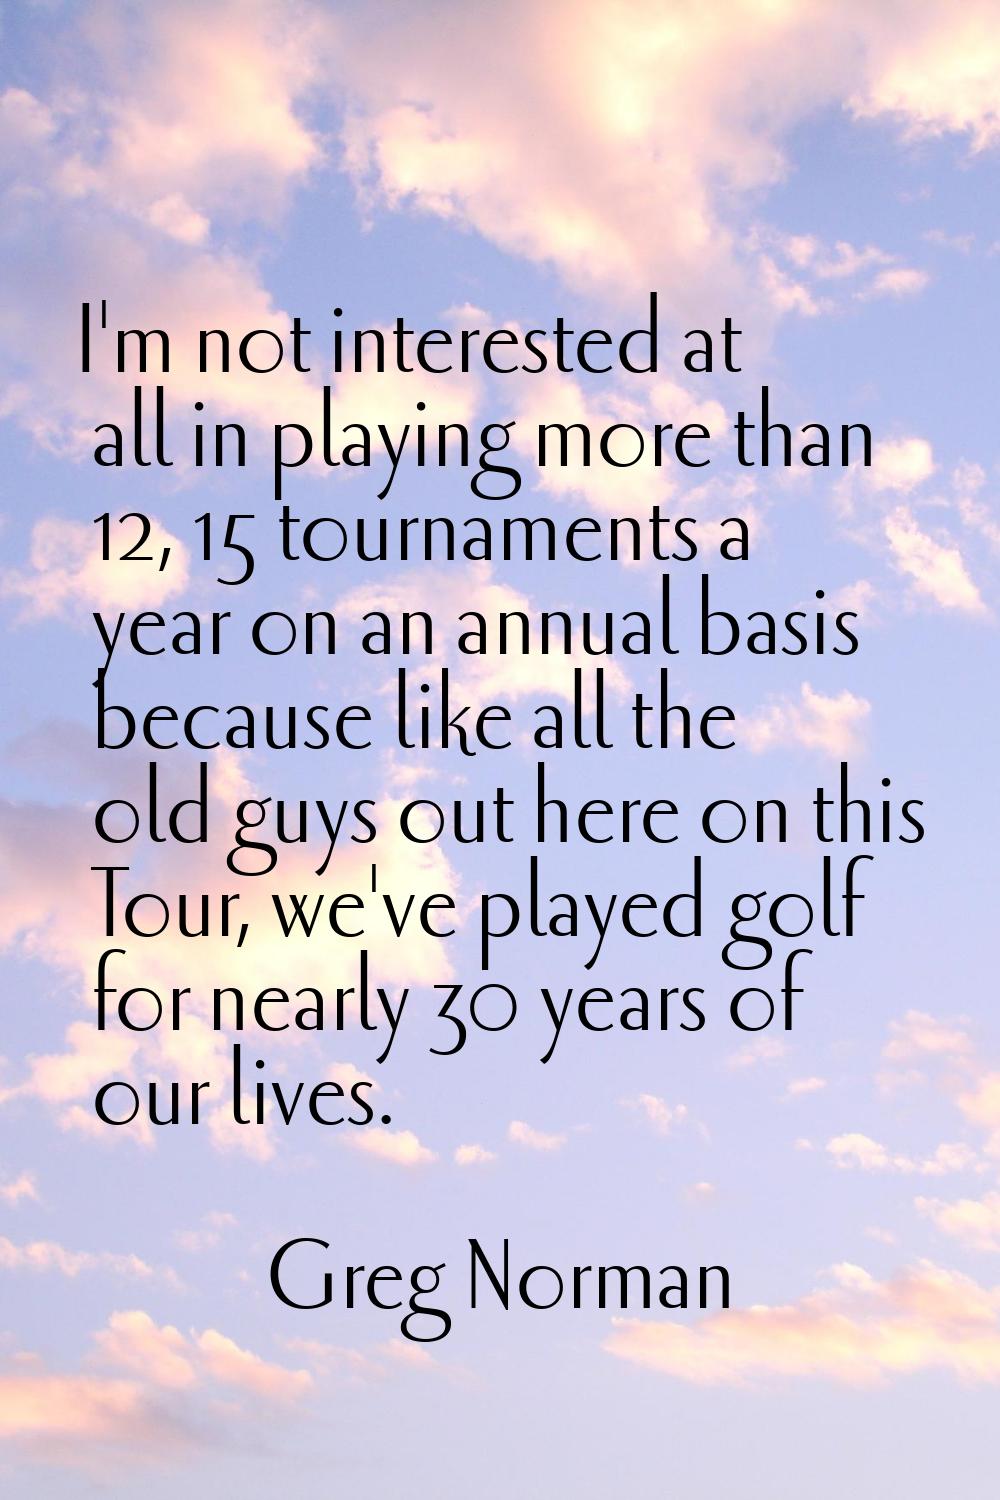 I'm not interested at all in playing more than 12, 15 tournaments a year on an annual basis because